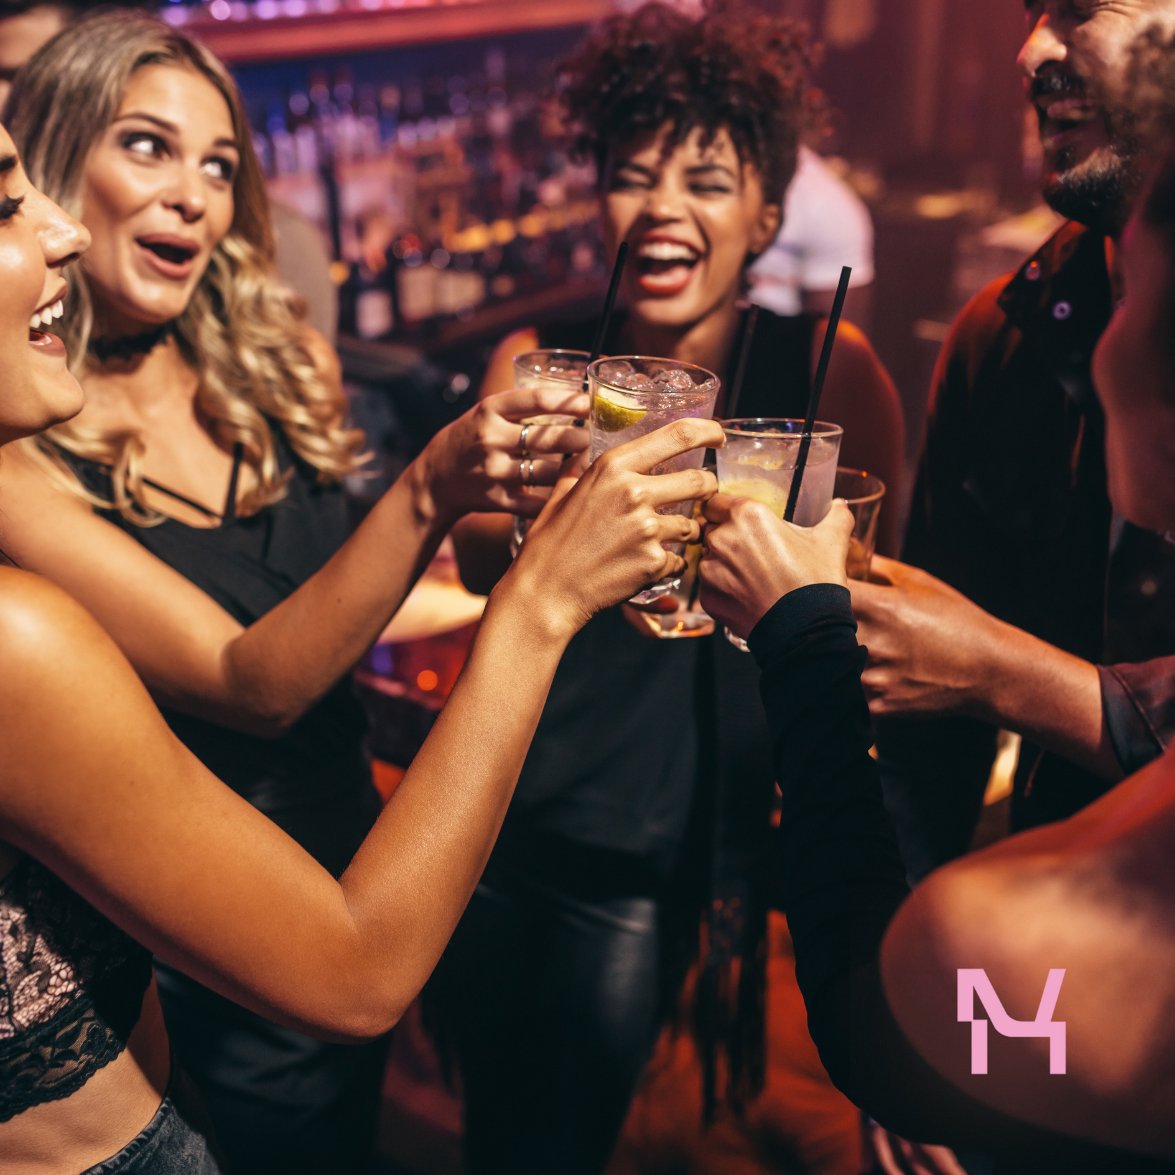 Looking for a wild weekend? Grab your crew and join us as we take our bachelor/bachelorette party game up a notch. Get ready to experience the city like never before! #comingsoon #MiamiBachParty #LastFlingBeforeTheRing #bachelorparty #bacheloretteparty #miamiparty #miamilounge